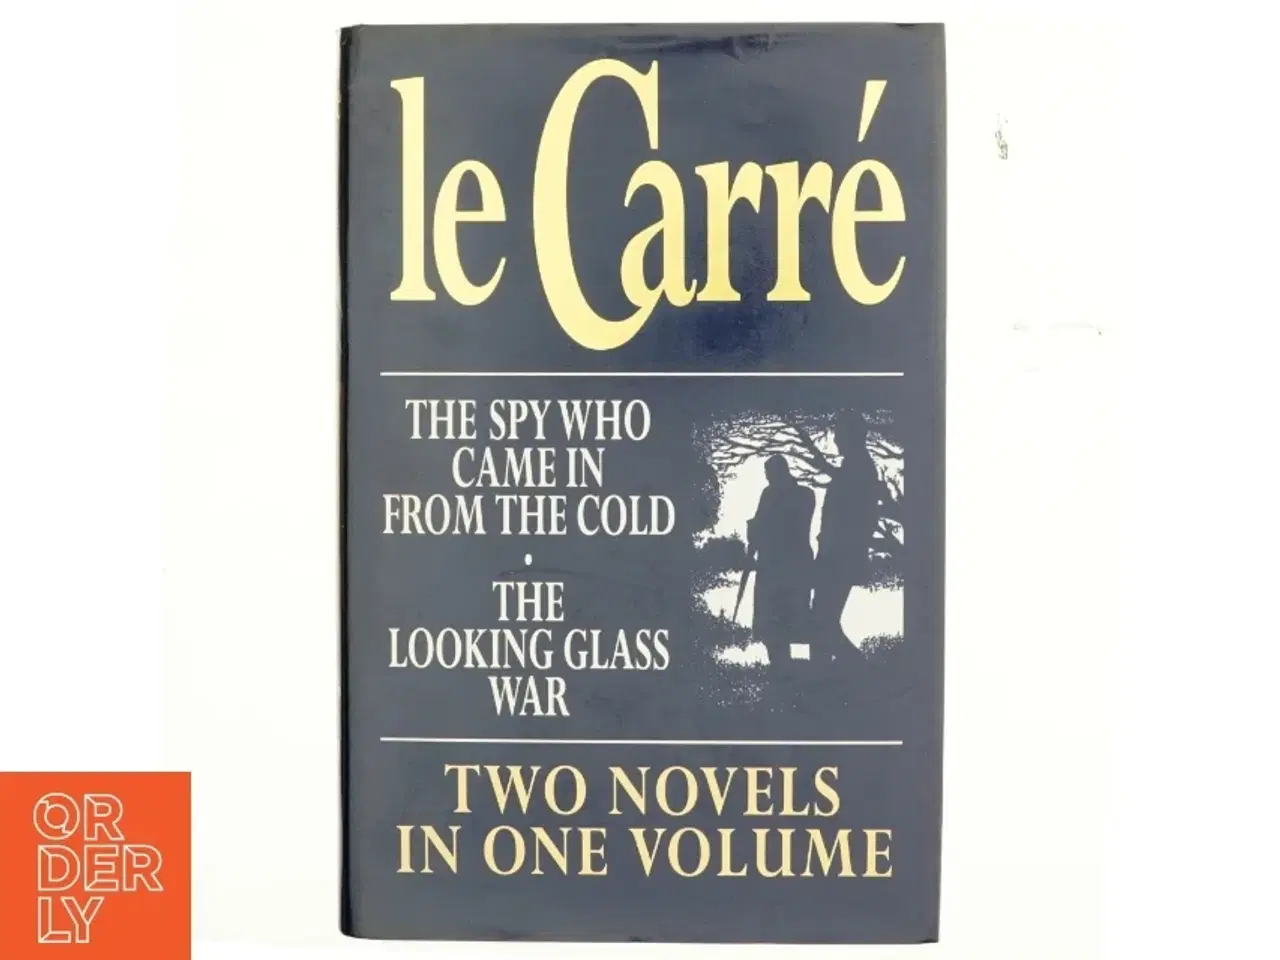 Billede 1 - The spy who came in from the cold : The looking glass war af John Le Carré (Bog)